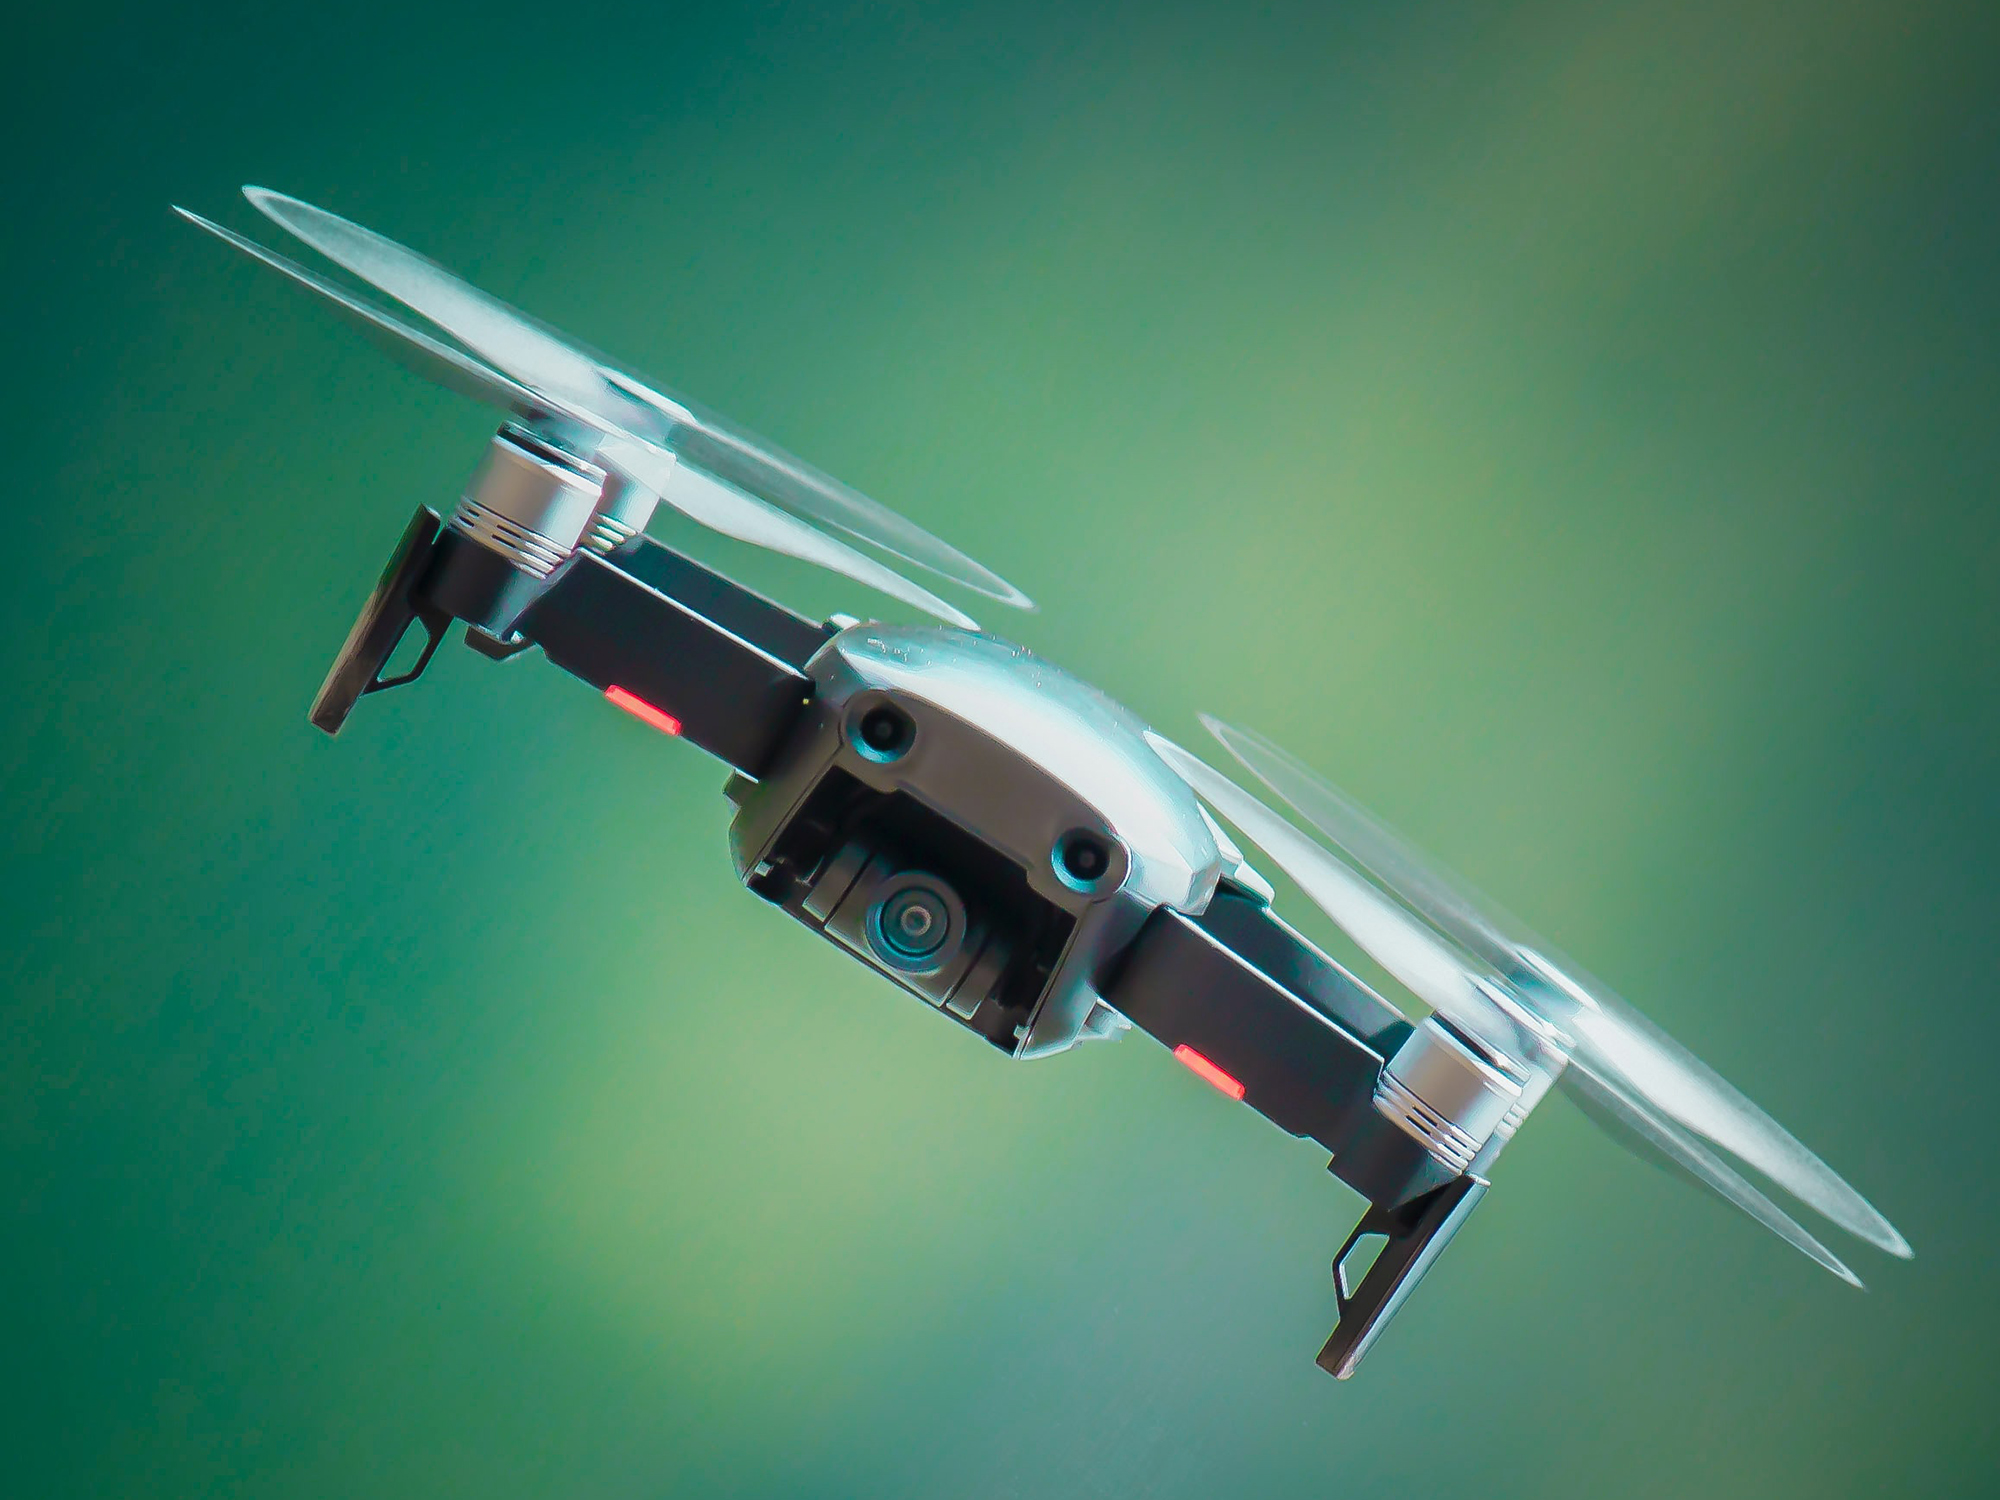 A beginner's guide to buying your first drone